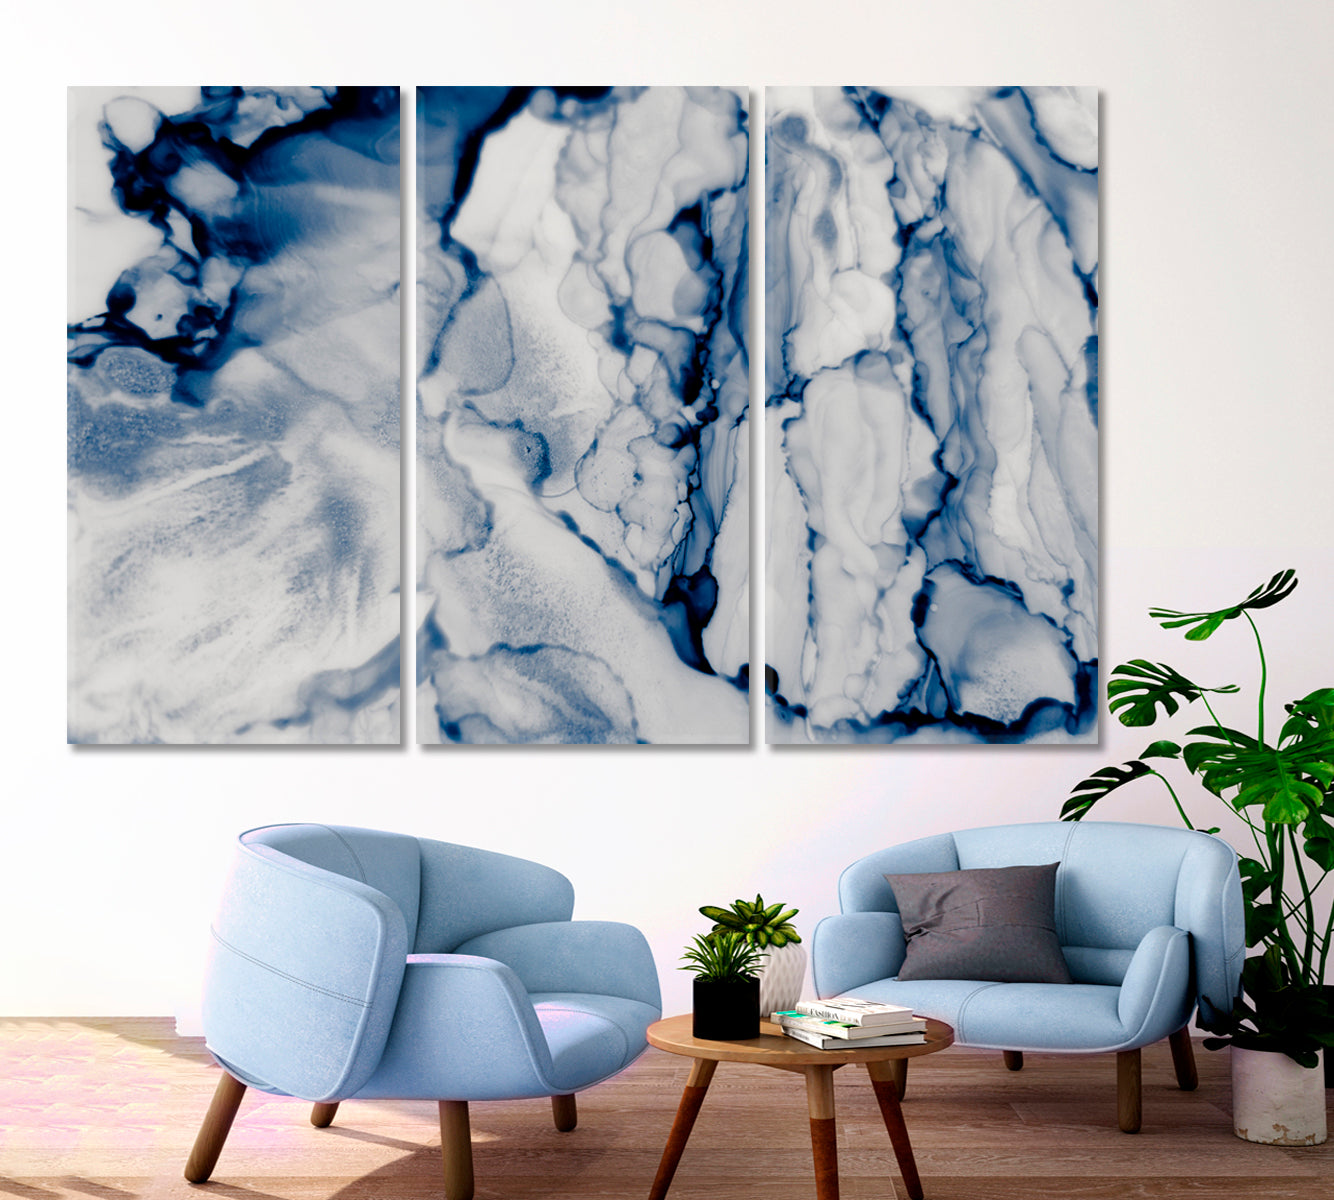 Chinese Ink in Water Blue Marble Abstract Abstract Art Print Artesty 3 panels 36" x 24" 